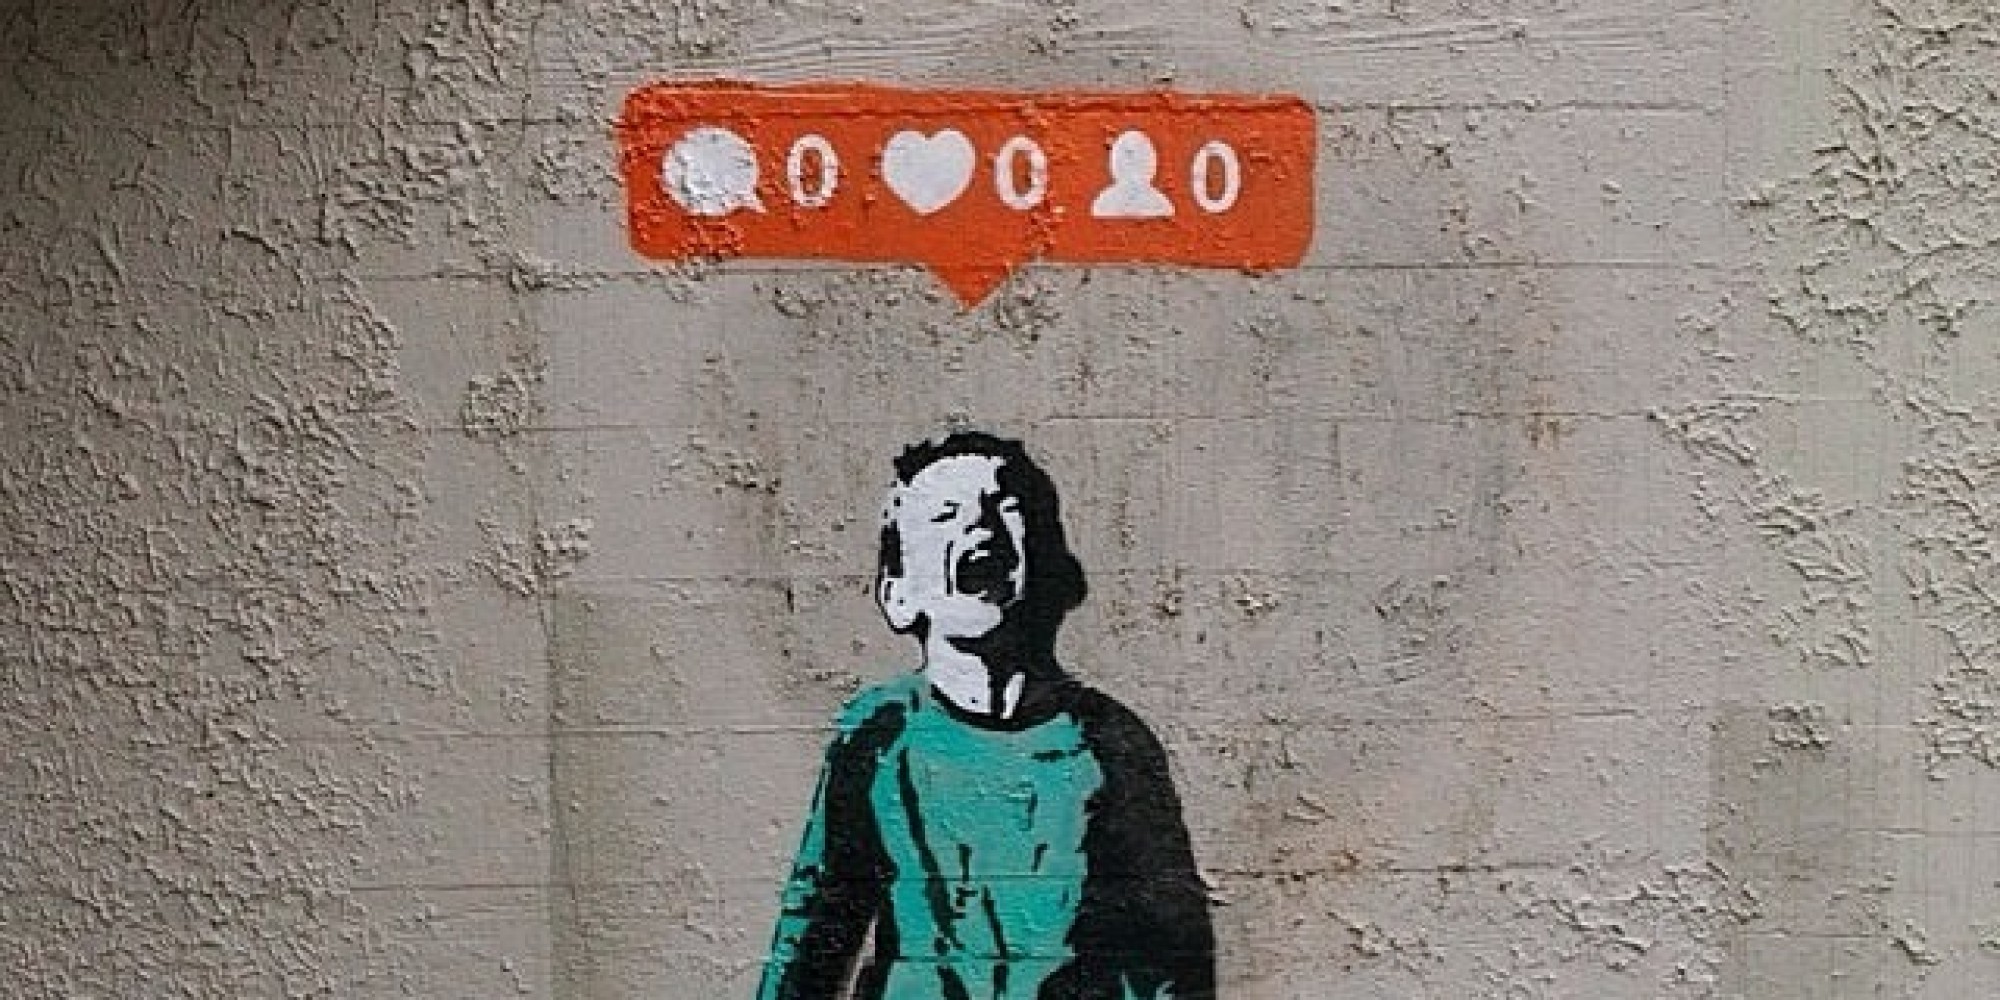 Not Banksy: A comment about social media